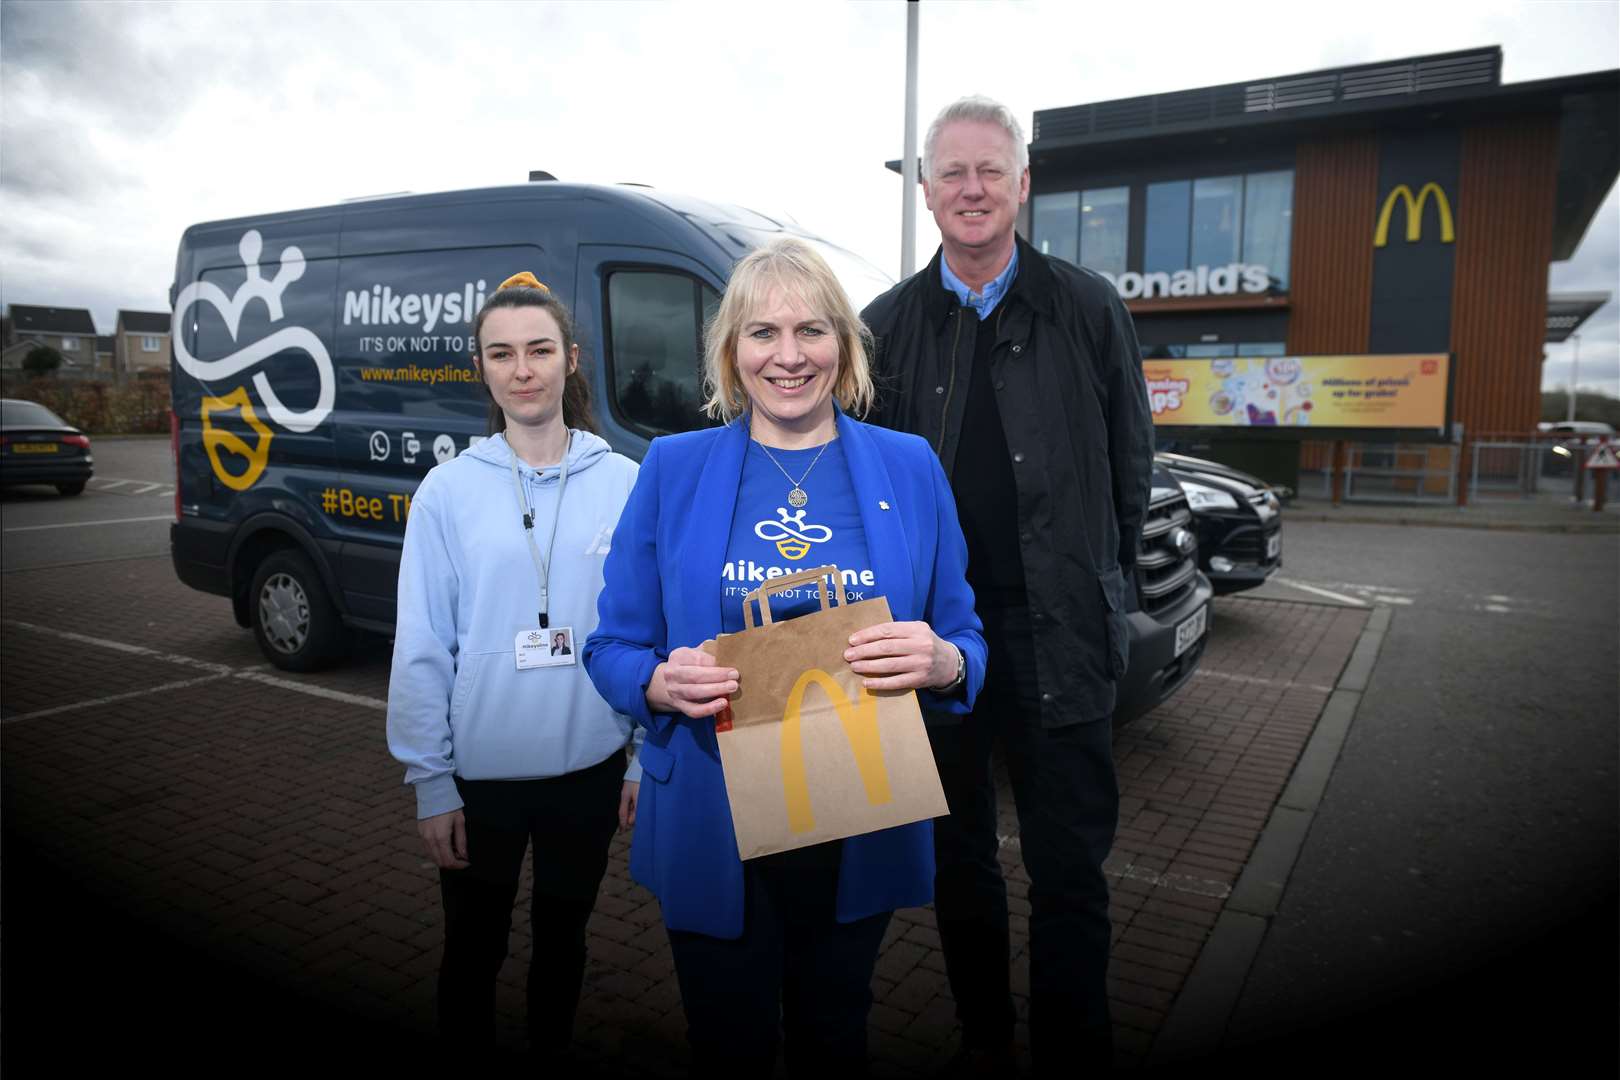 Ami McCarle, Support Worker, Emily Stokes, Mikeysline Chief Executive and Craig Duncan, McDonalds Franchisee. Picture: James Mackenzie.